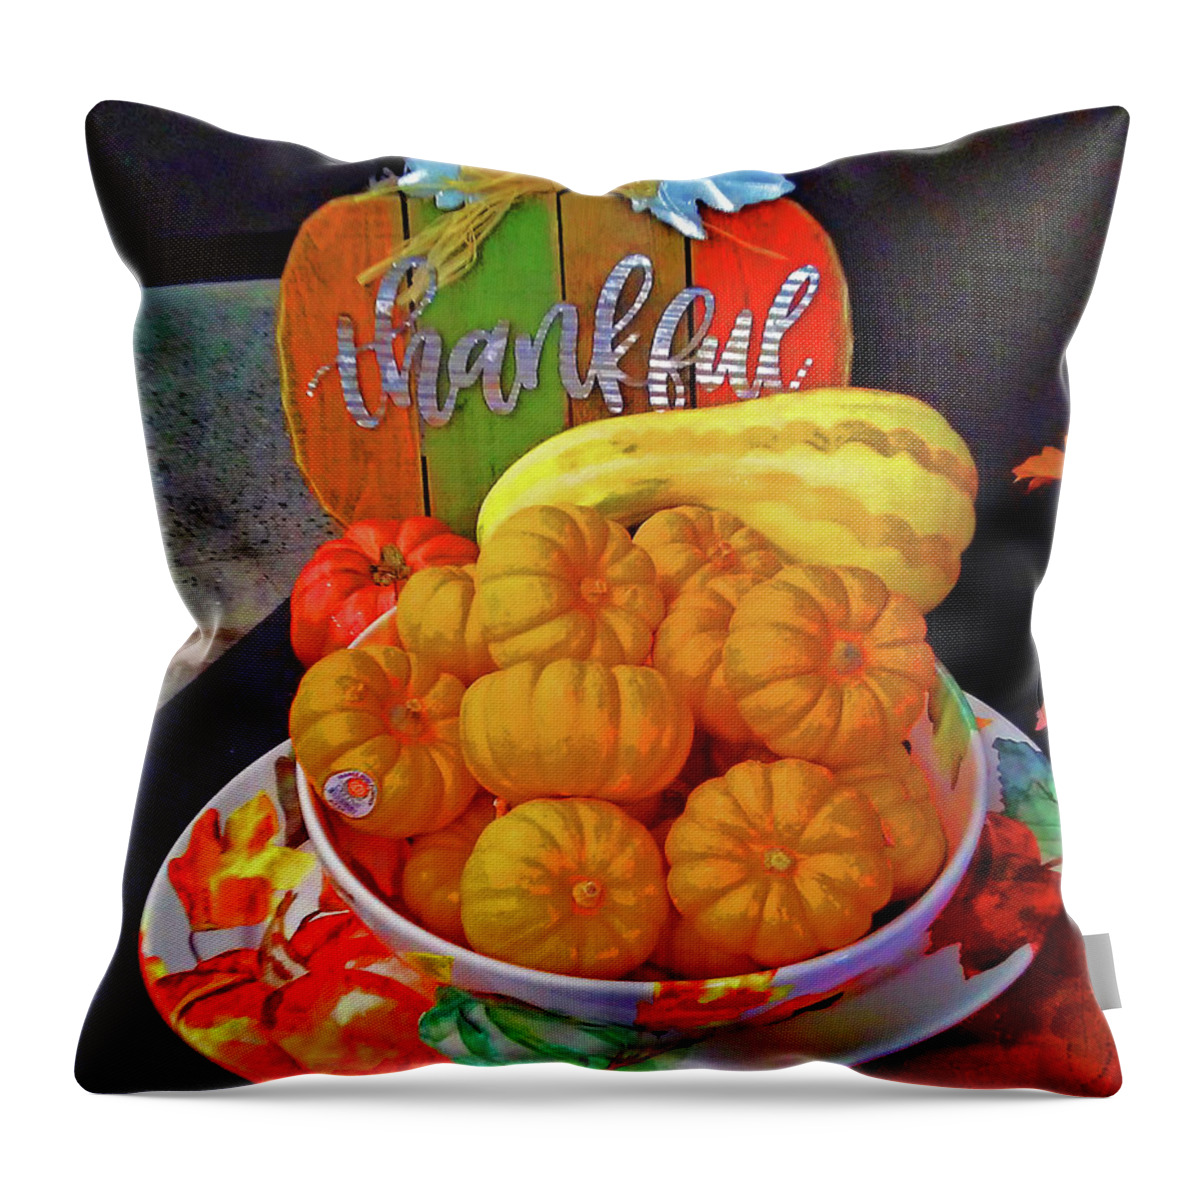 Portrait Throw Pillow featuring the photograph Thankful by Andrew Lawrence